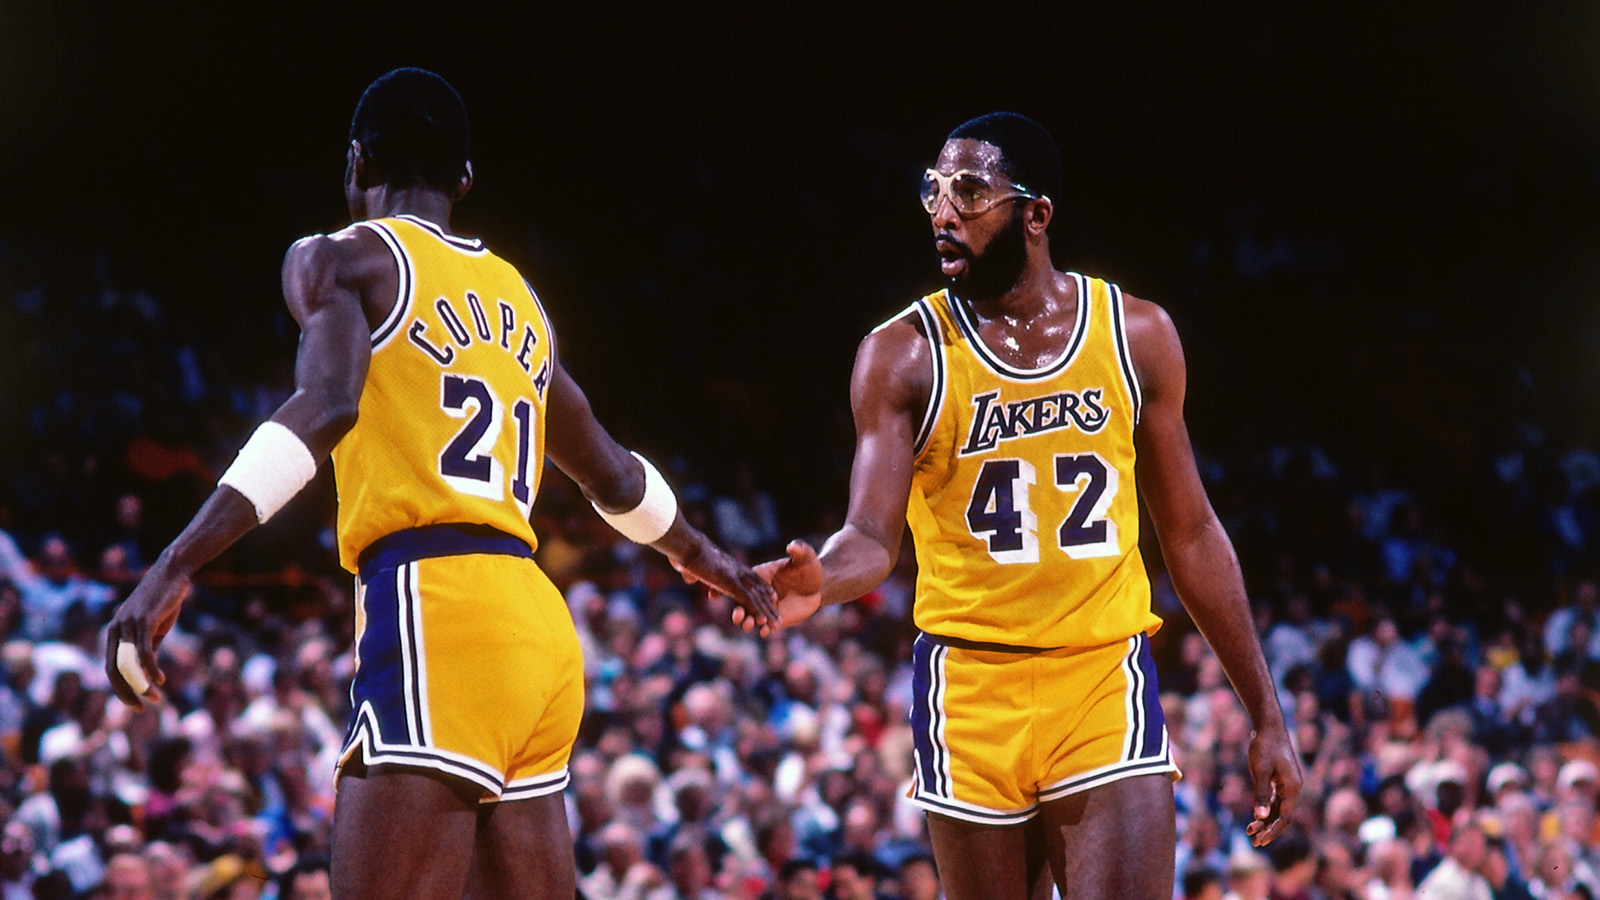 Michael Cooper and James Worthy getting back on defense